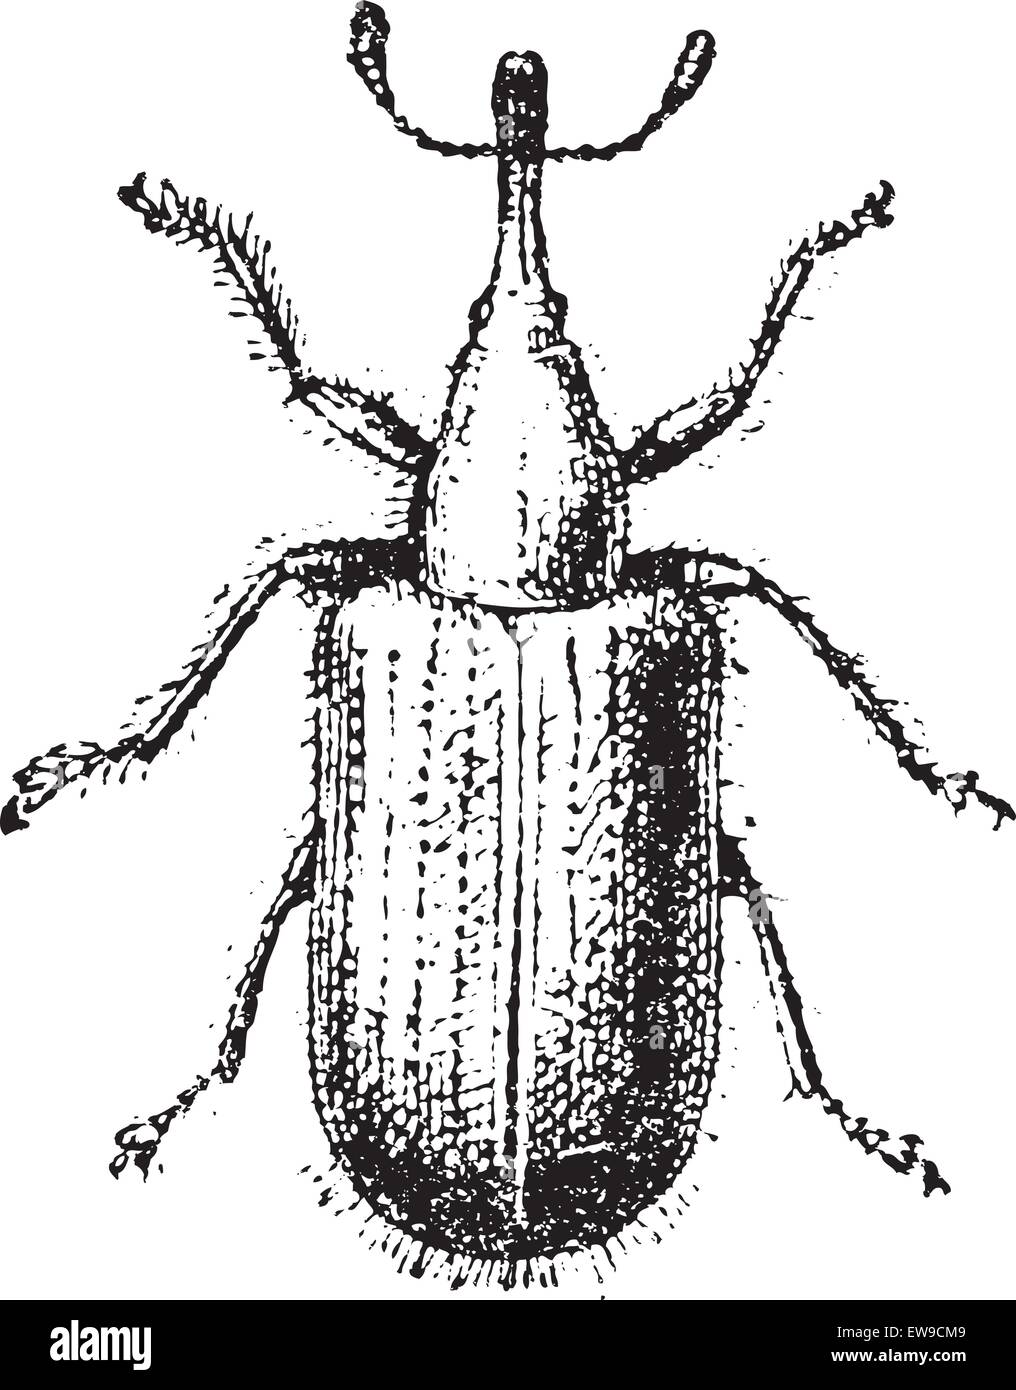 Weevil or Curculionoidea, vintage engraved illustration. Dictionary of Words and Things - Larive and Fleury - 1895 Stock Vector